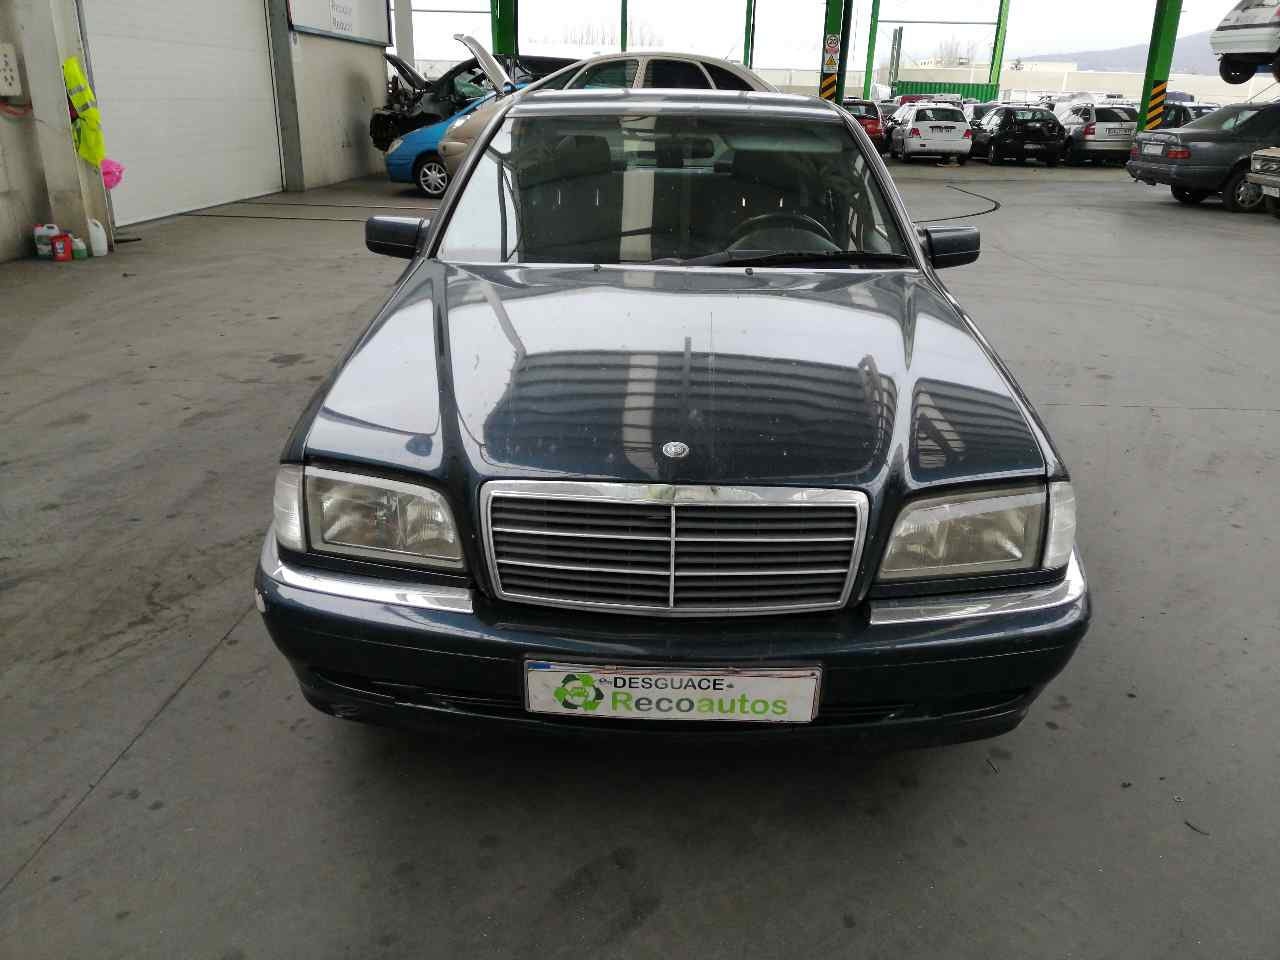 MERCEDES-BENZ C-Class W202/S202 (1993-2001) Other Control Units 0175457332, 0265109052 19878004